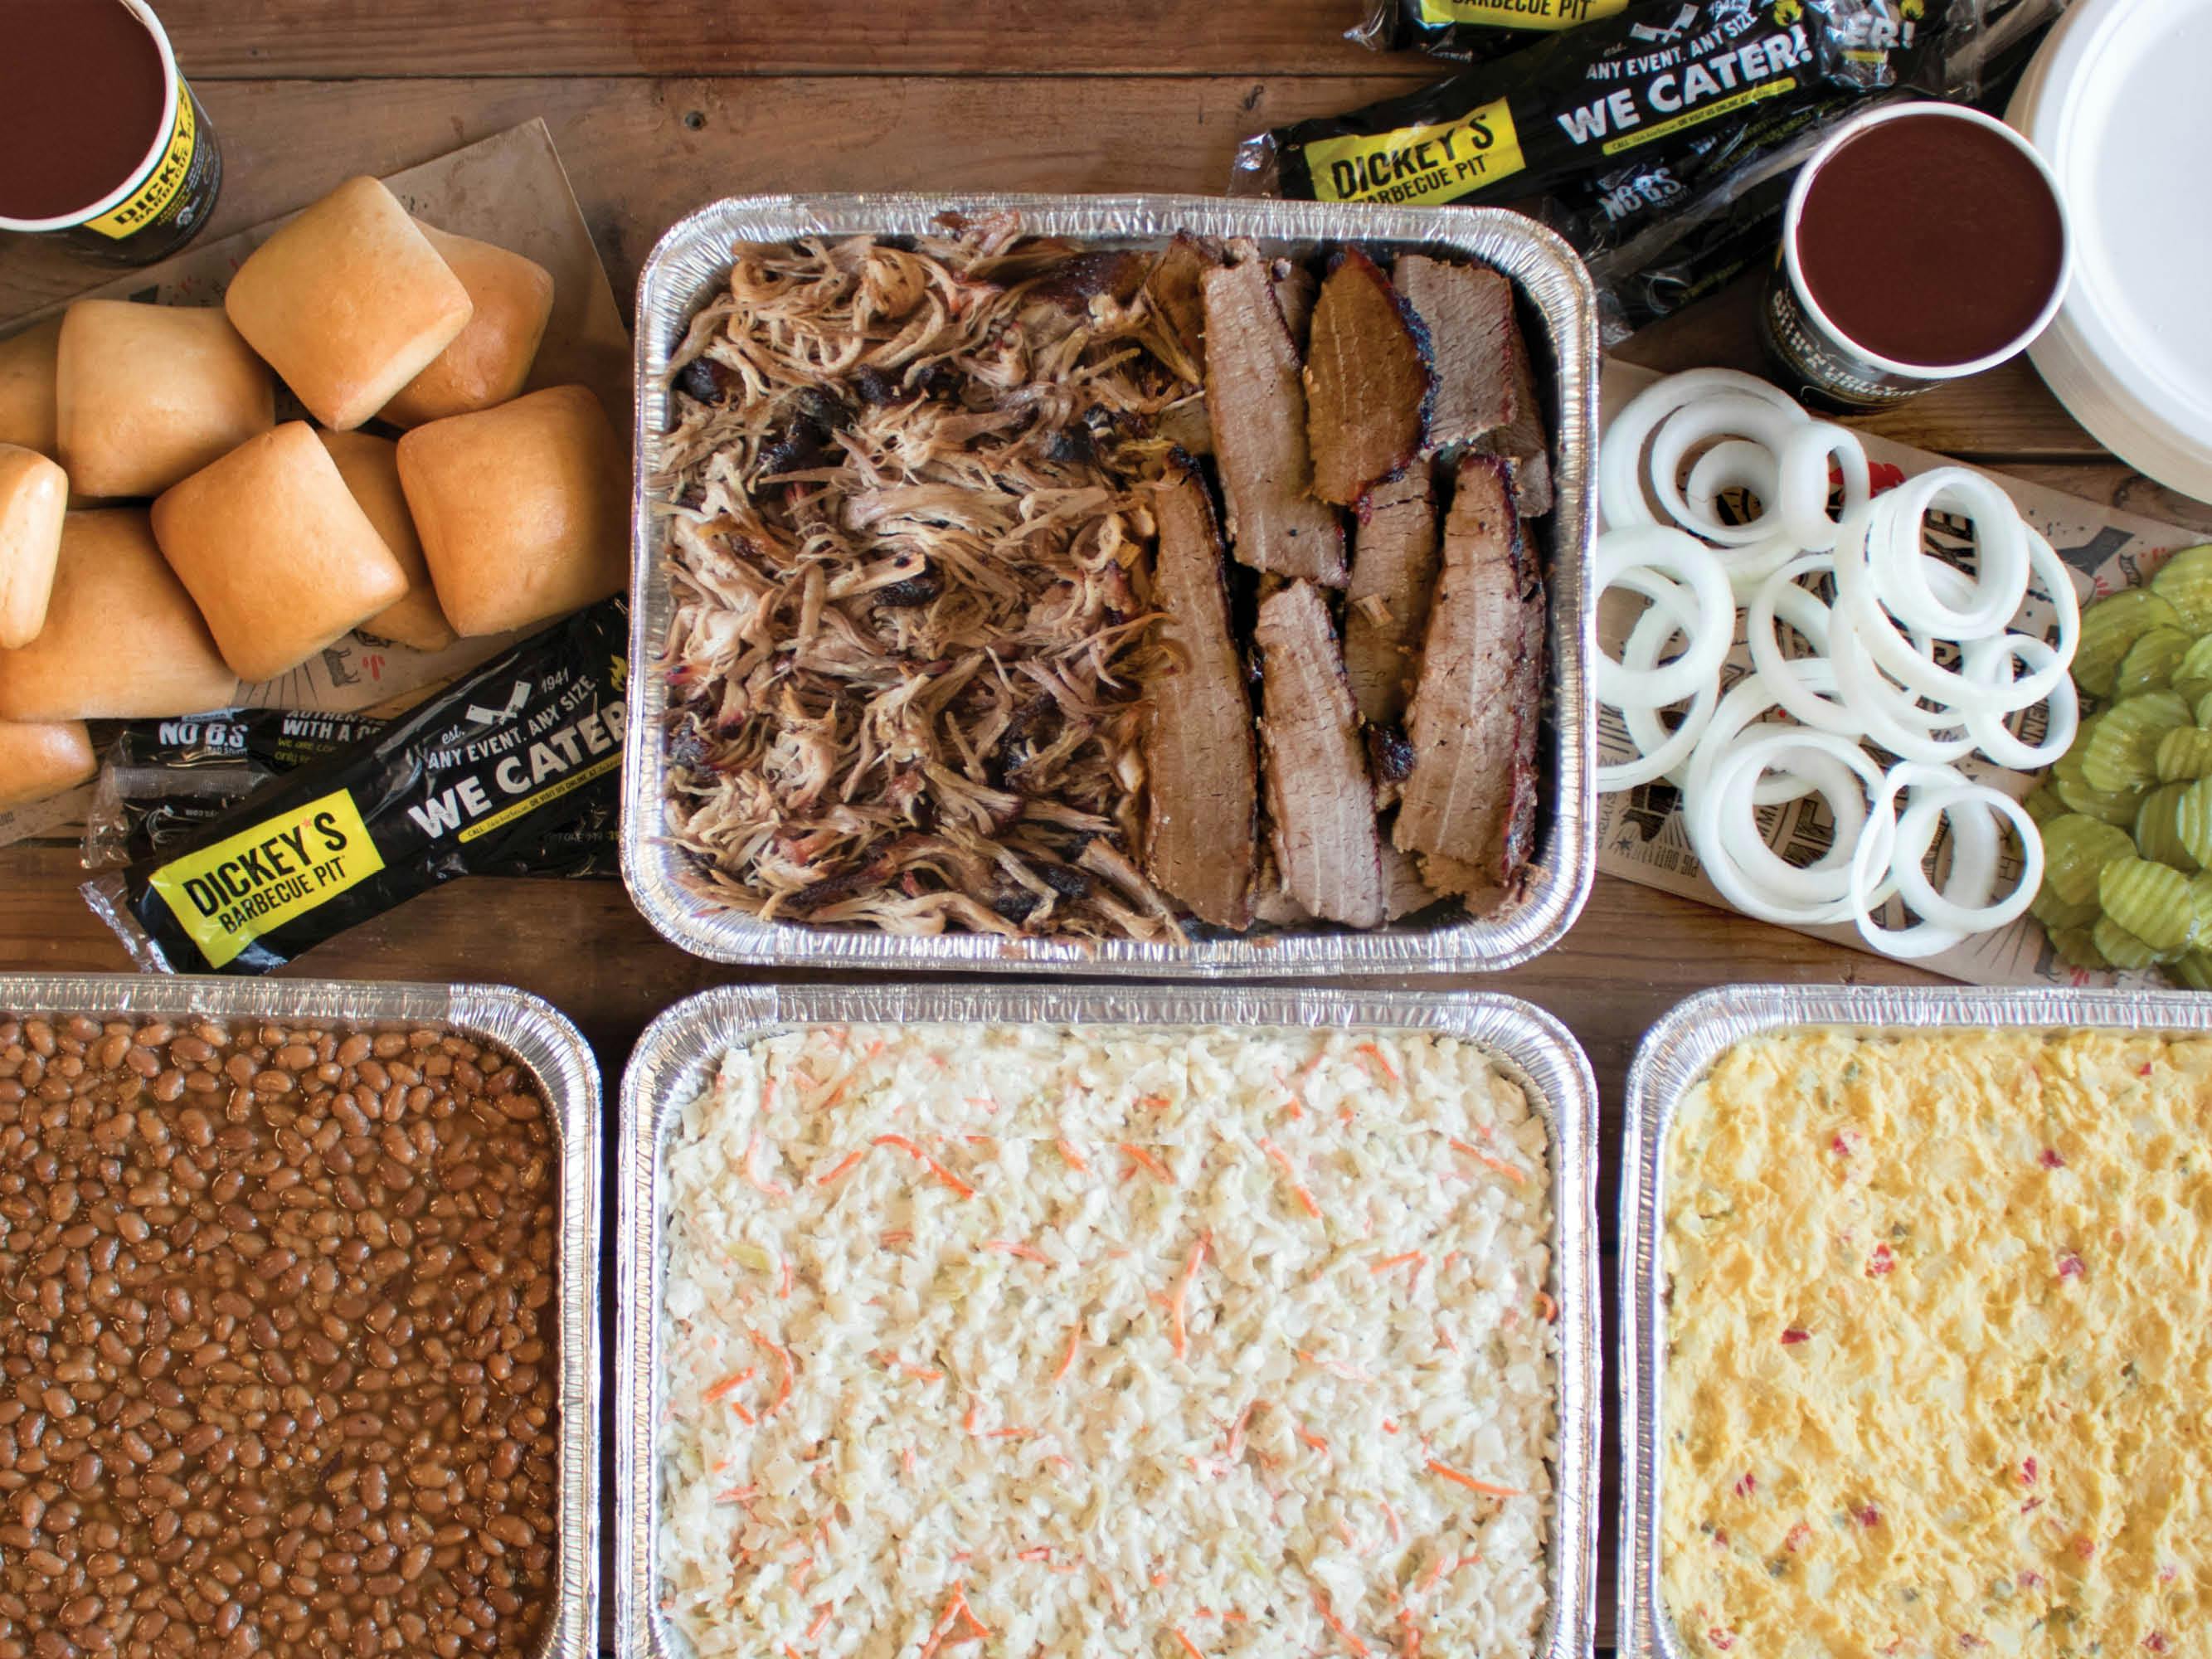 FOX 5 Las Vegas: Dickey's Barbecue Pit Tailgate Party Pack